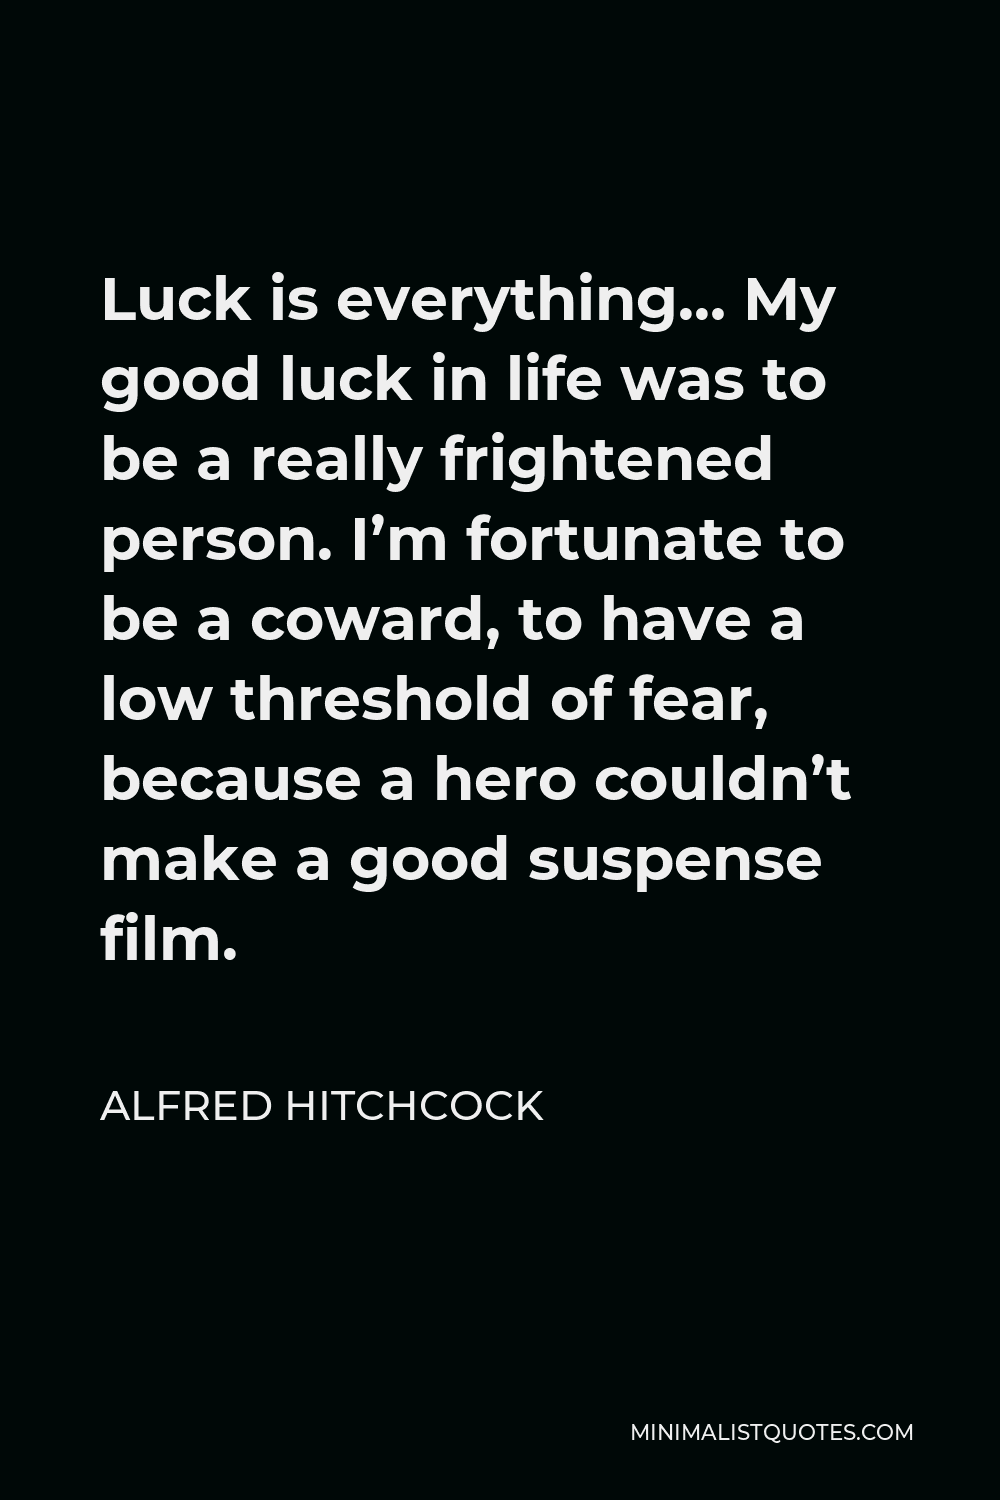 Alfred Hitchcock Quote - Luck is everything… My good luck in life was to be a really frightened person. I’m fortunate to be a coward, to have a low threshold of fear, because a hero couldn’t make a good suspense film.